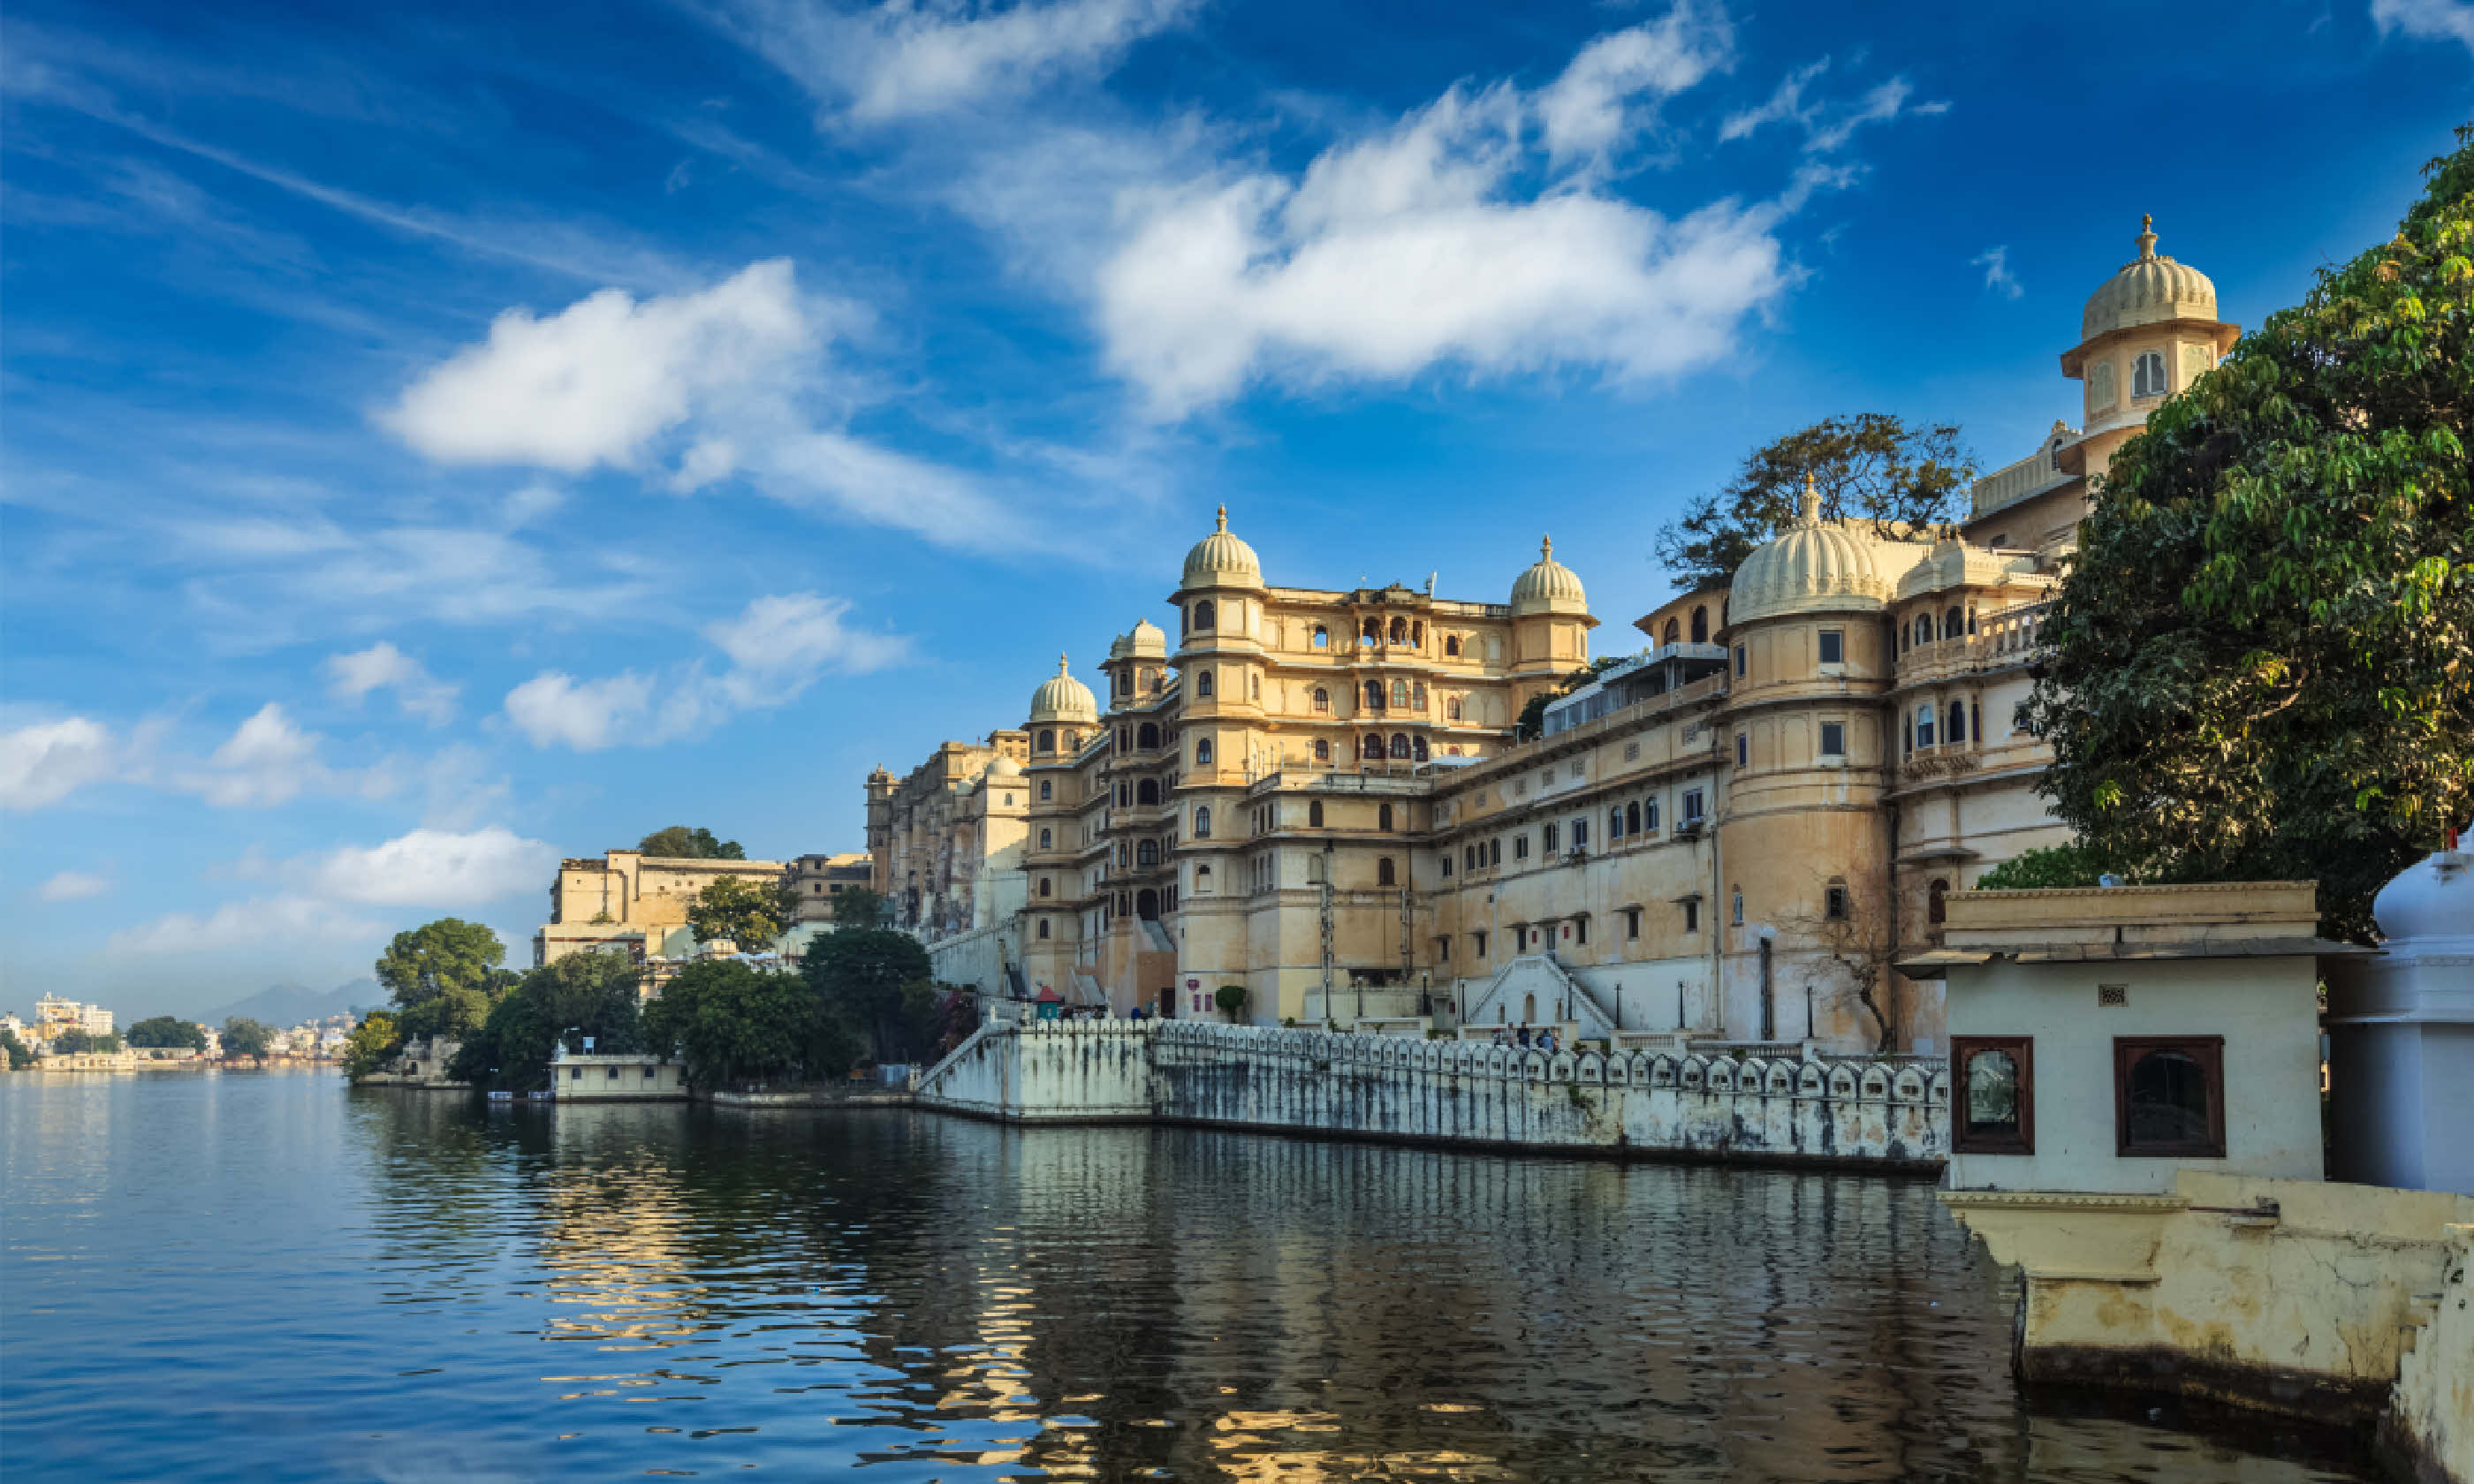 Udaipur City Palace and Lake Pichola (Shutterstock)